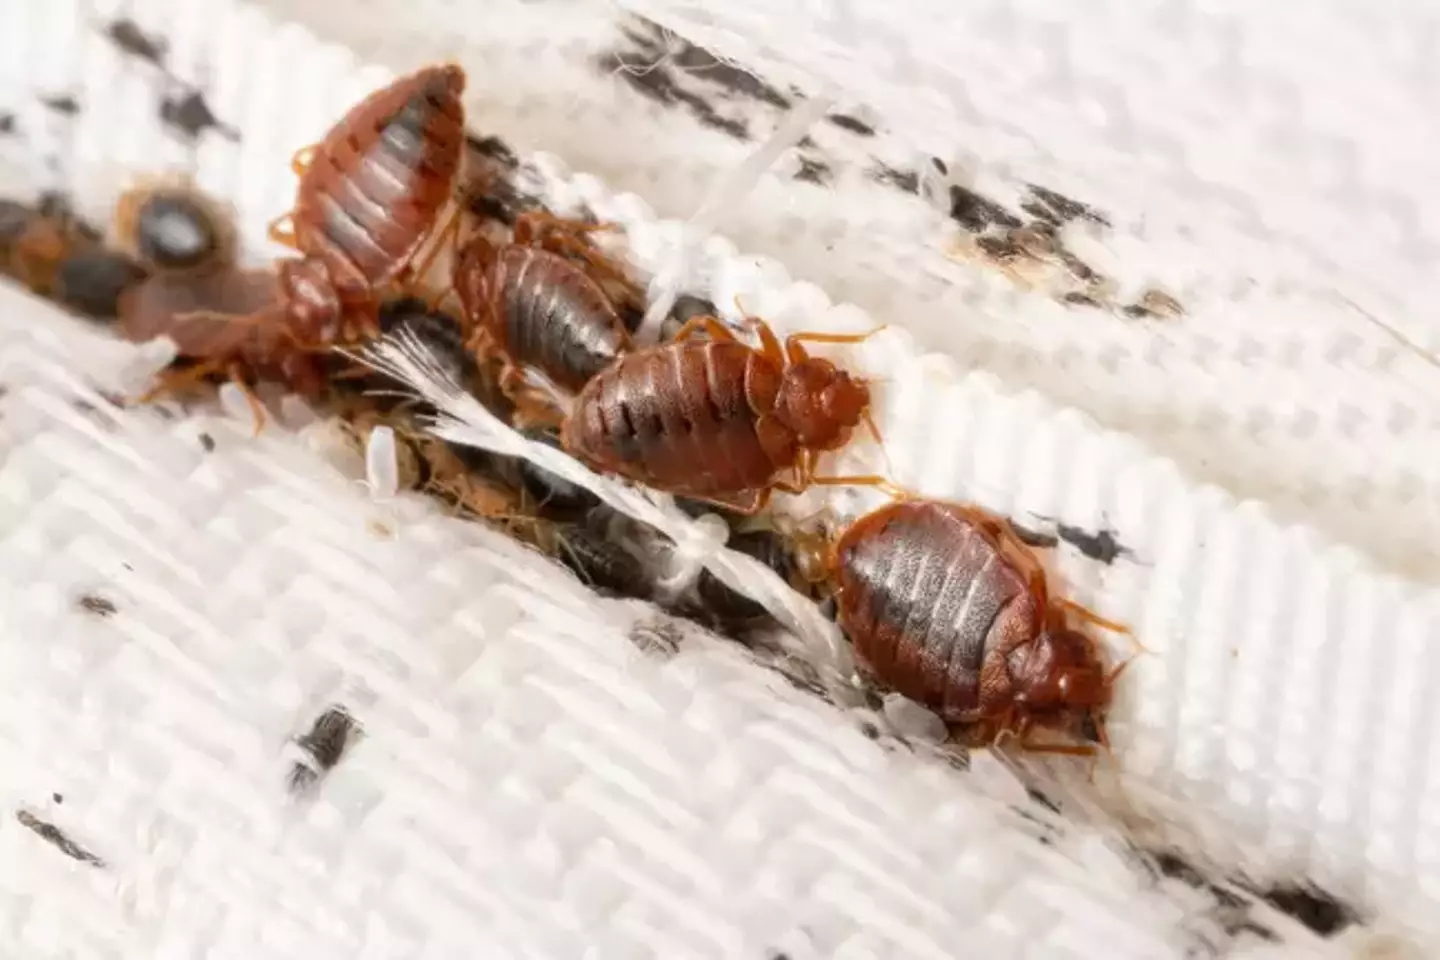 Experts think the creepy crawly was probably not a bed bug, which looks like these little meanies.